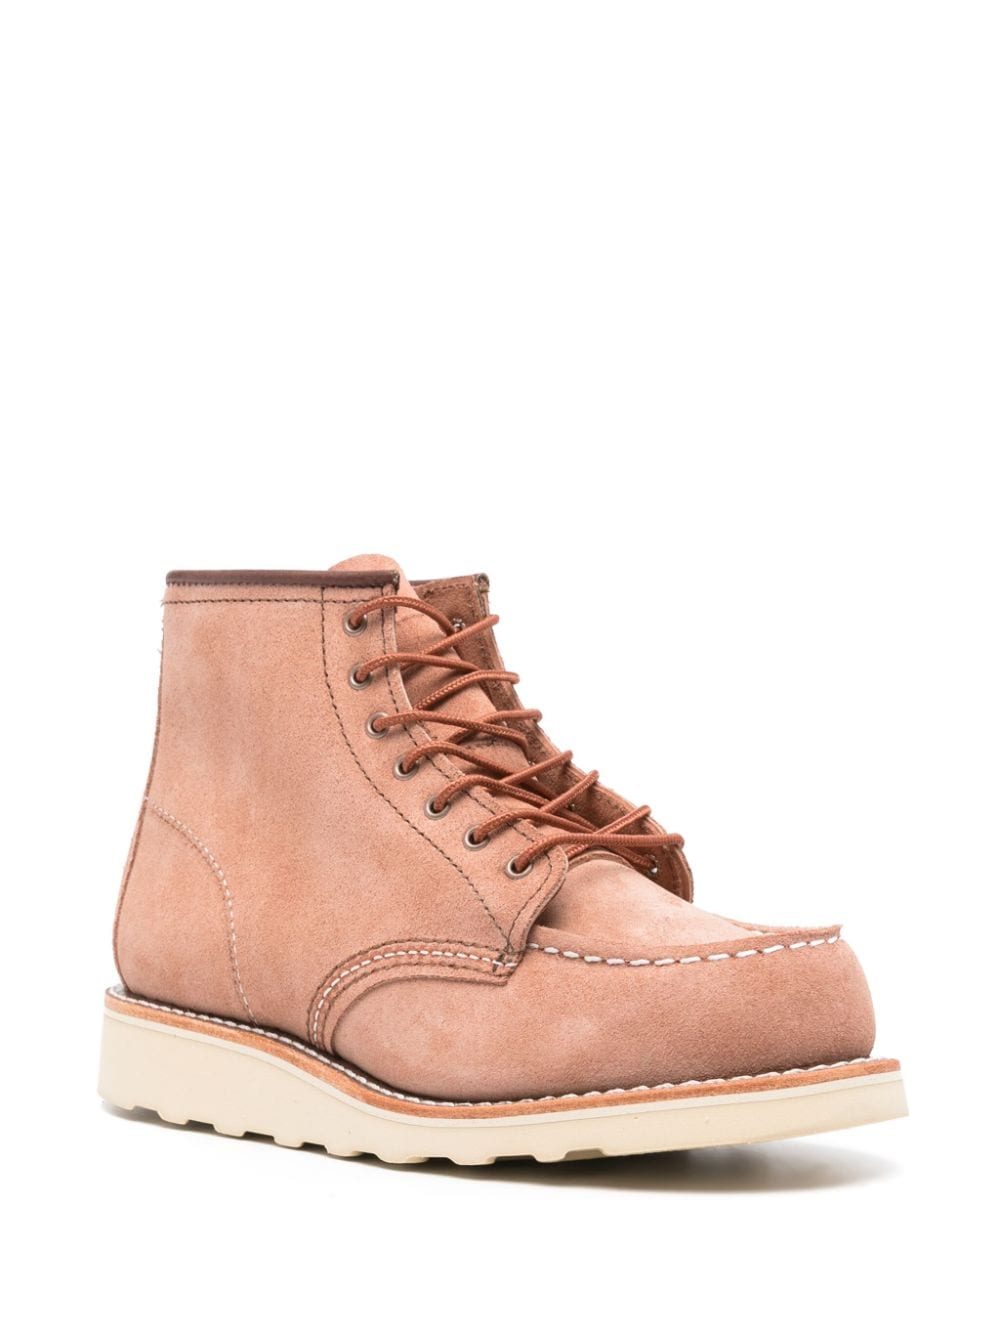 Red Wing Boots Pink